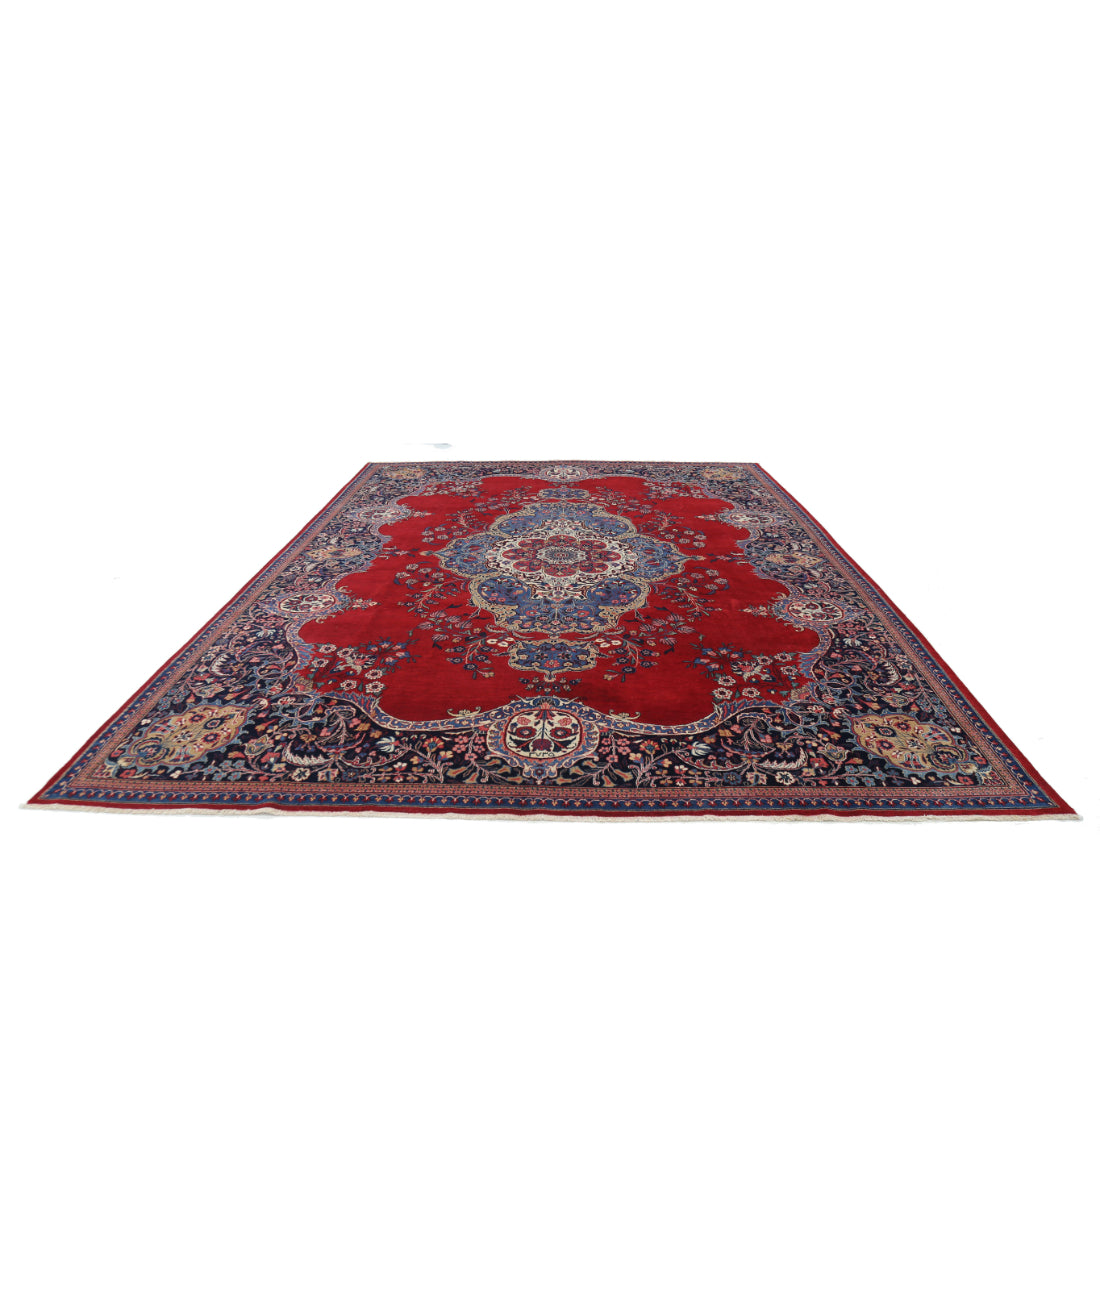 Hand Knotted Persian Mashad Wool Rug - 10'7'' x 13'7'' 10'7'' x 13'7'' (318 X 408) / Red / Blue